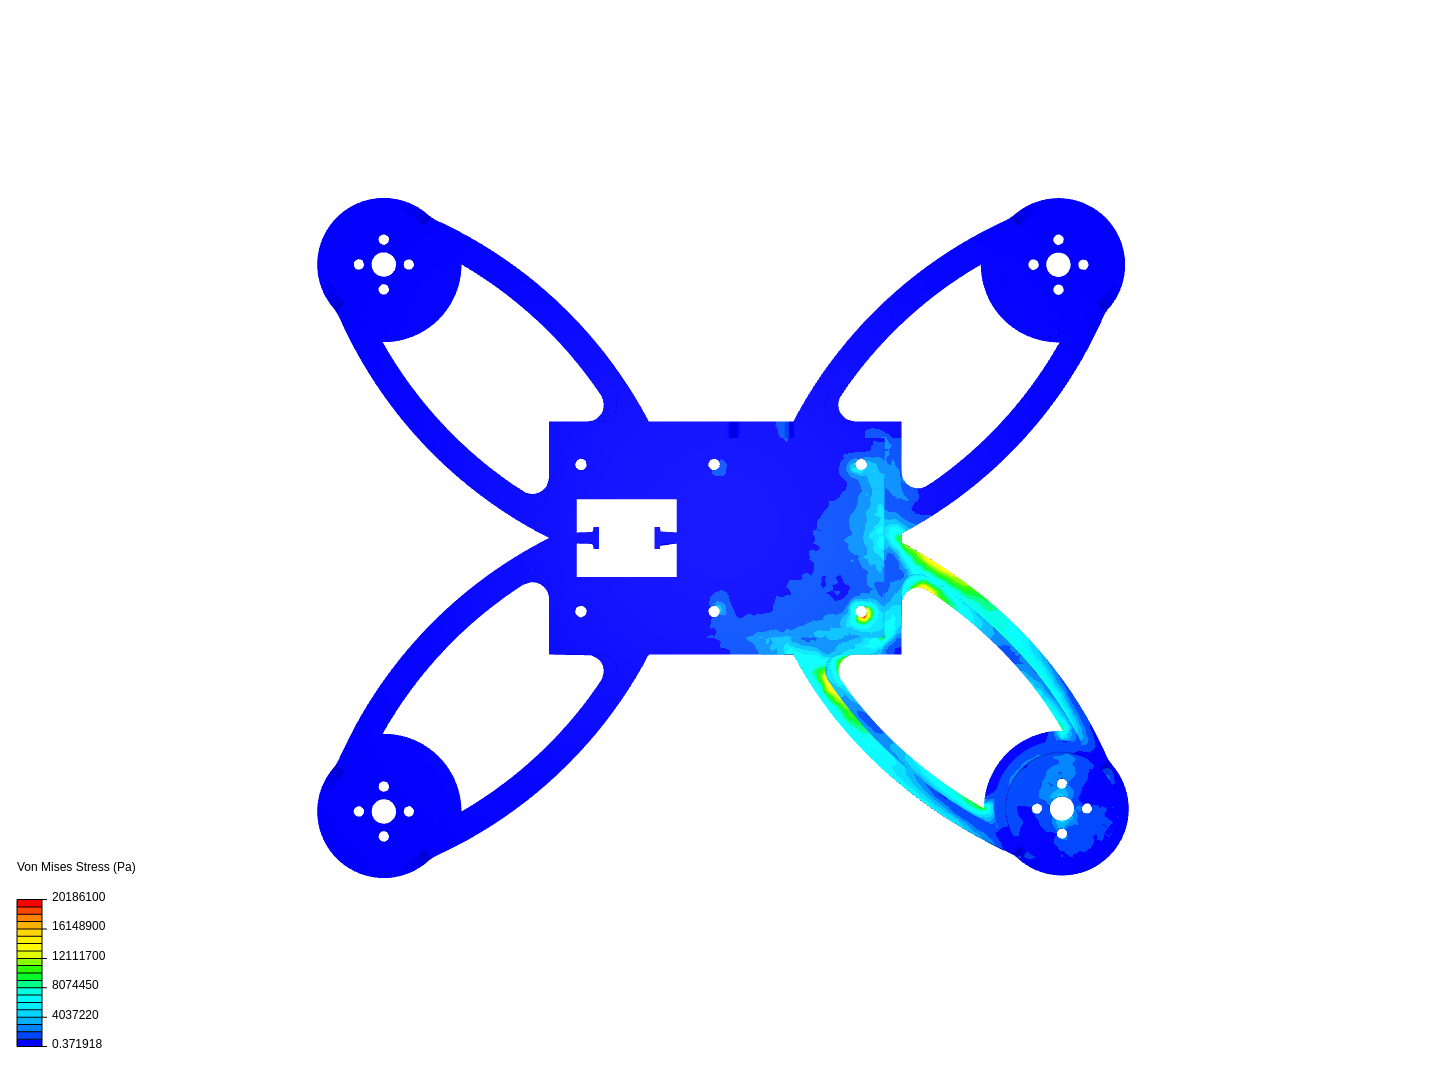 Droneframe image